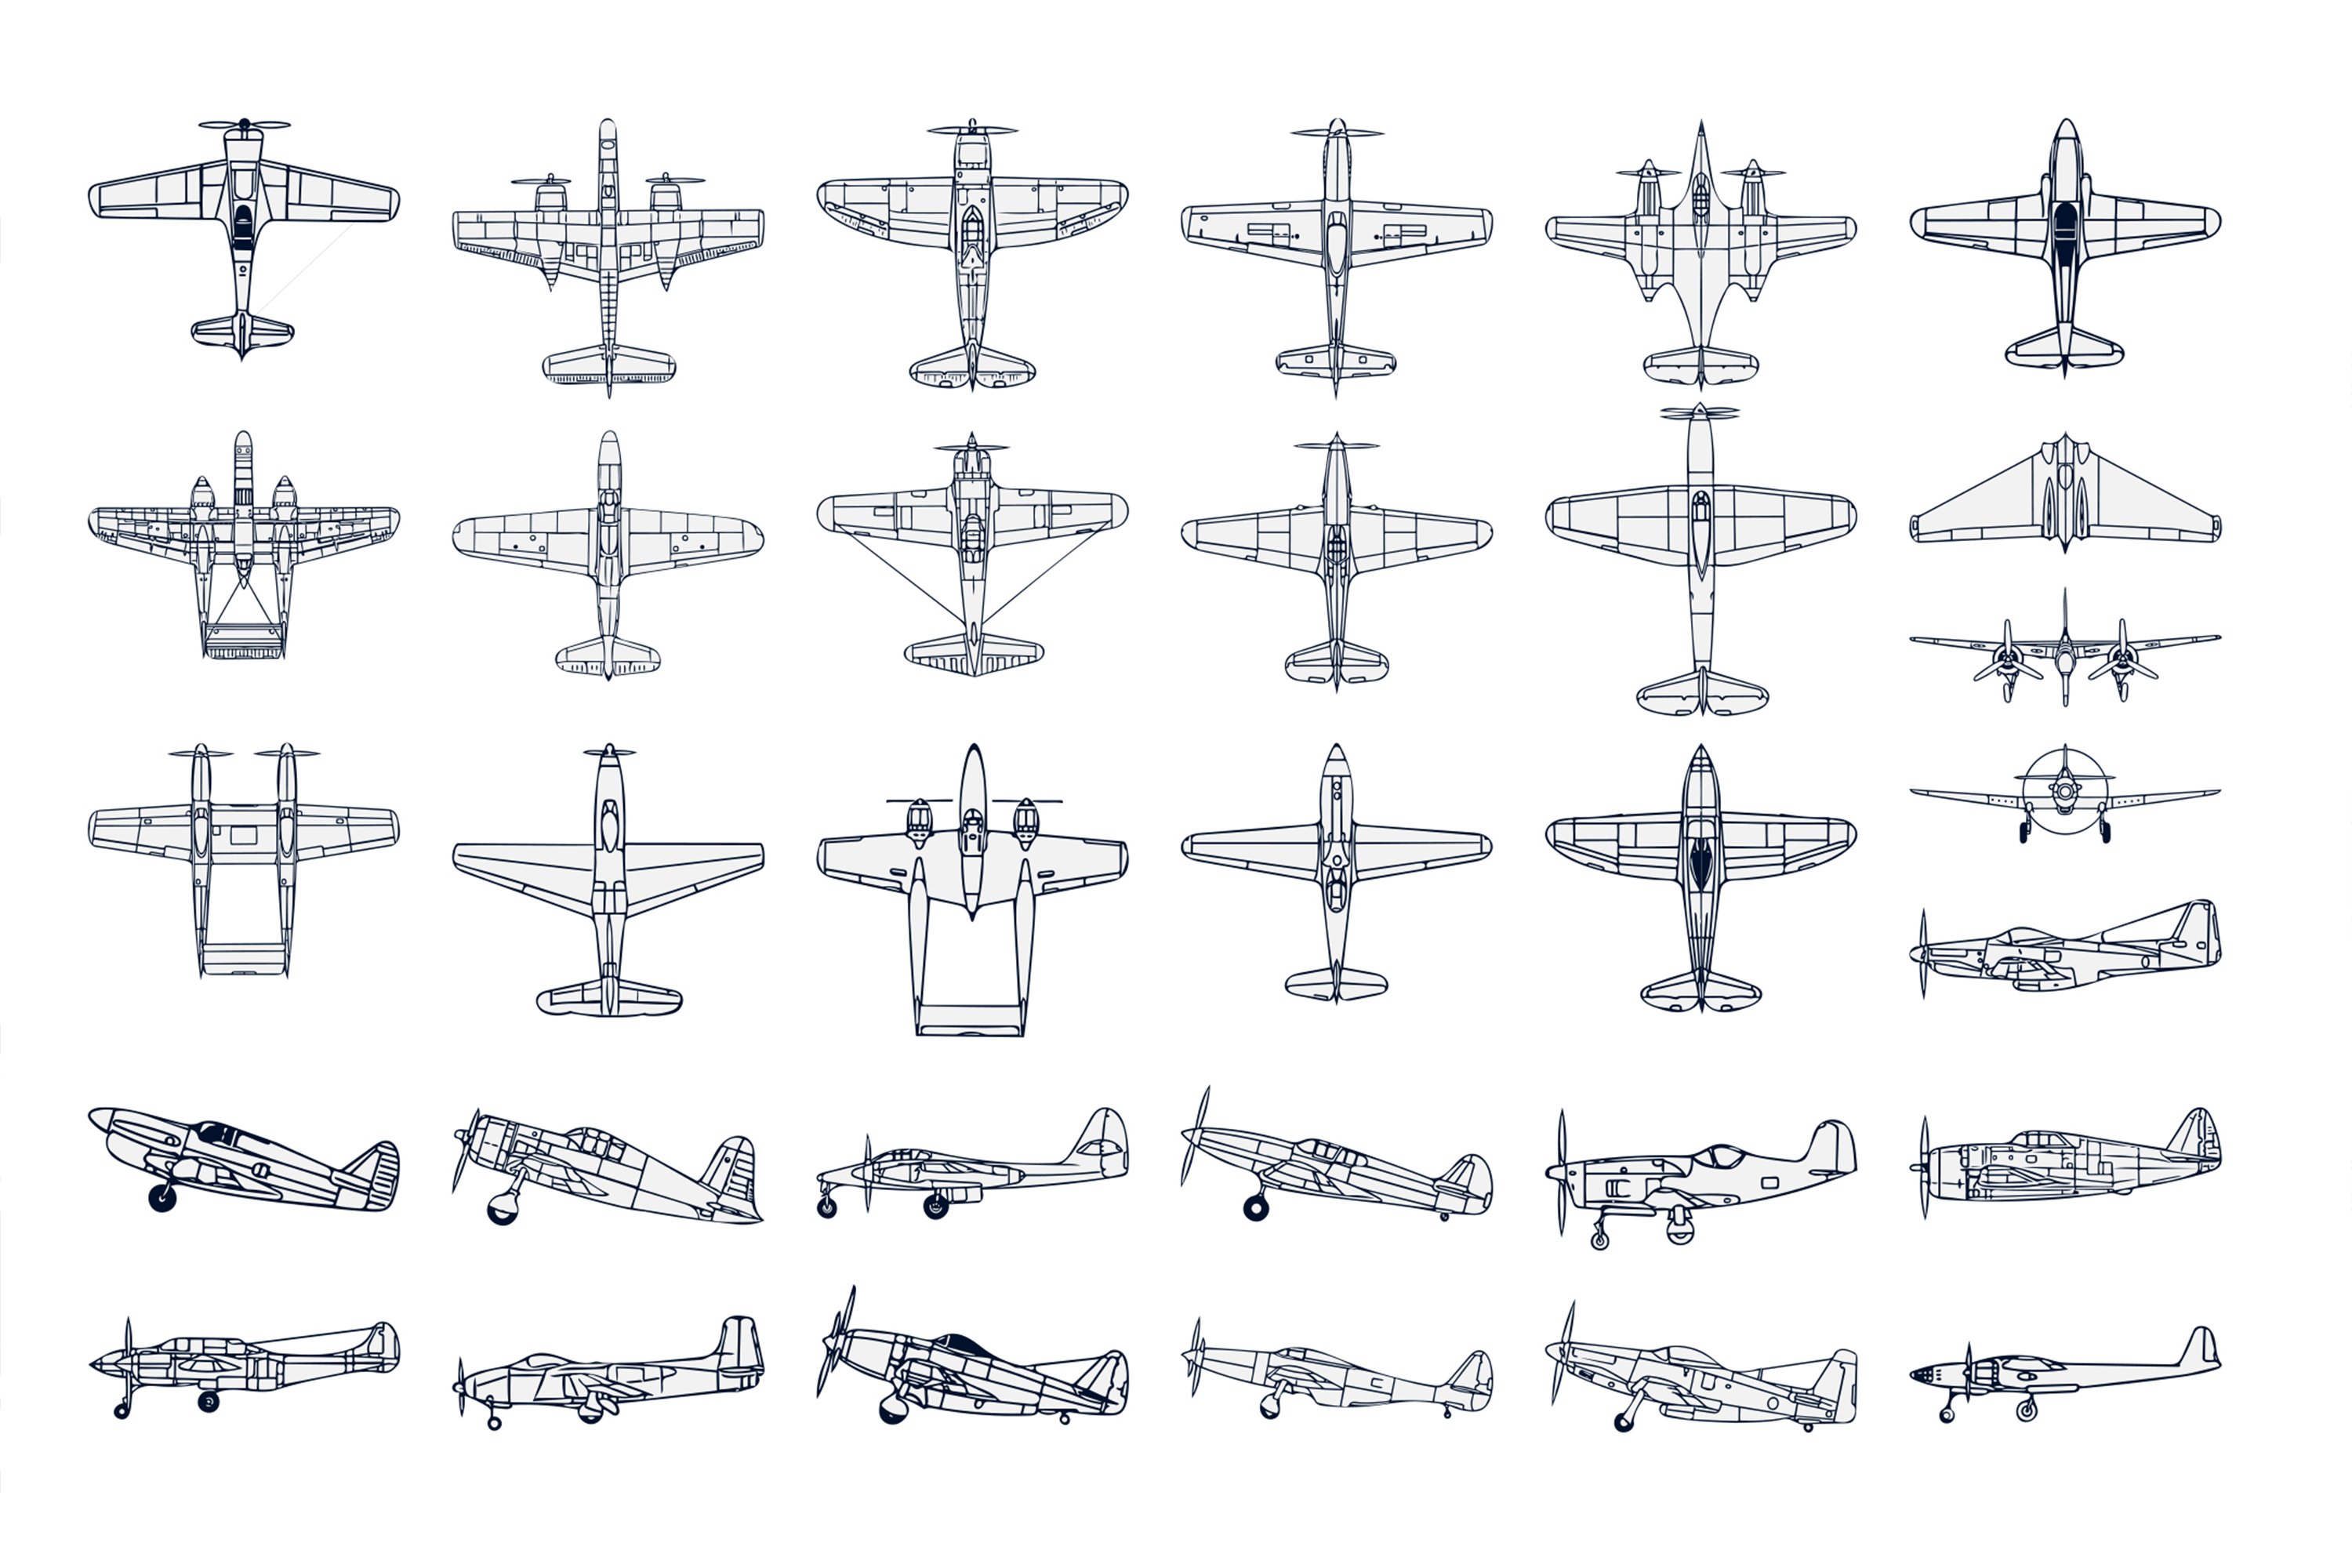 Diverse of types USA military fighter airplanes.